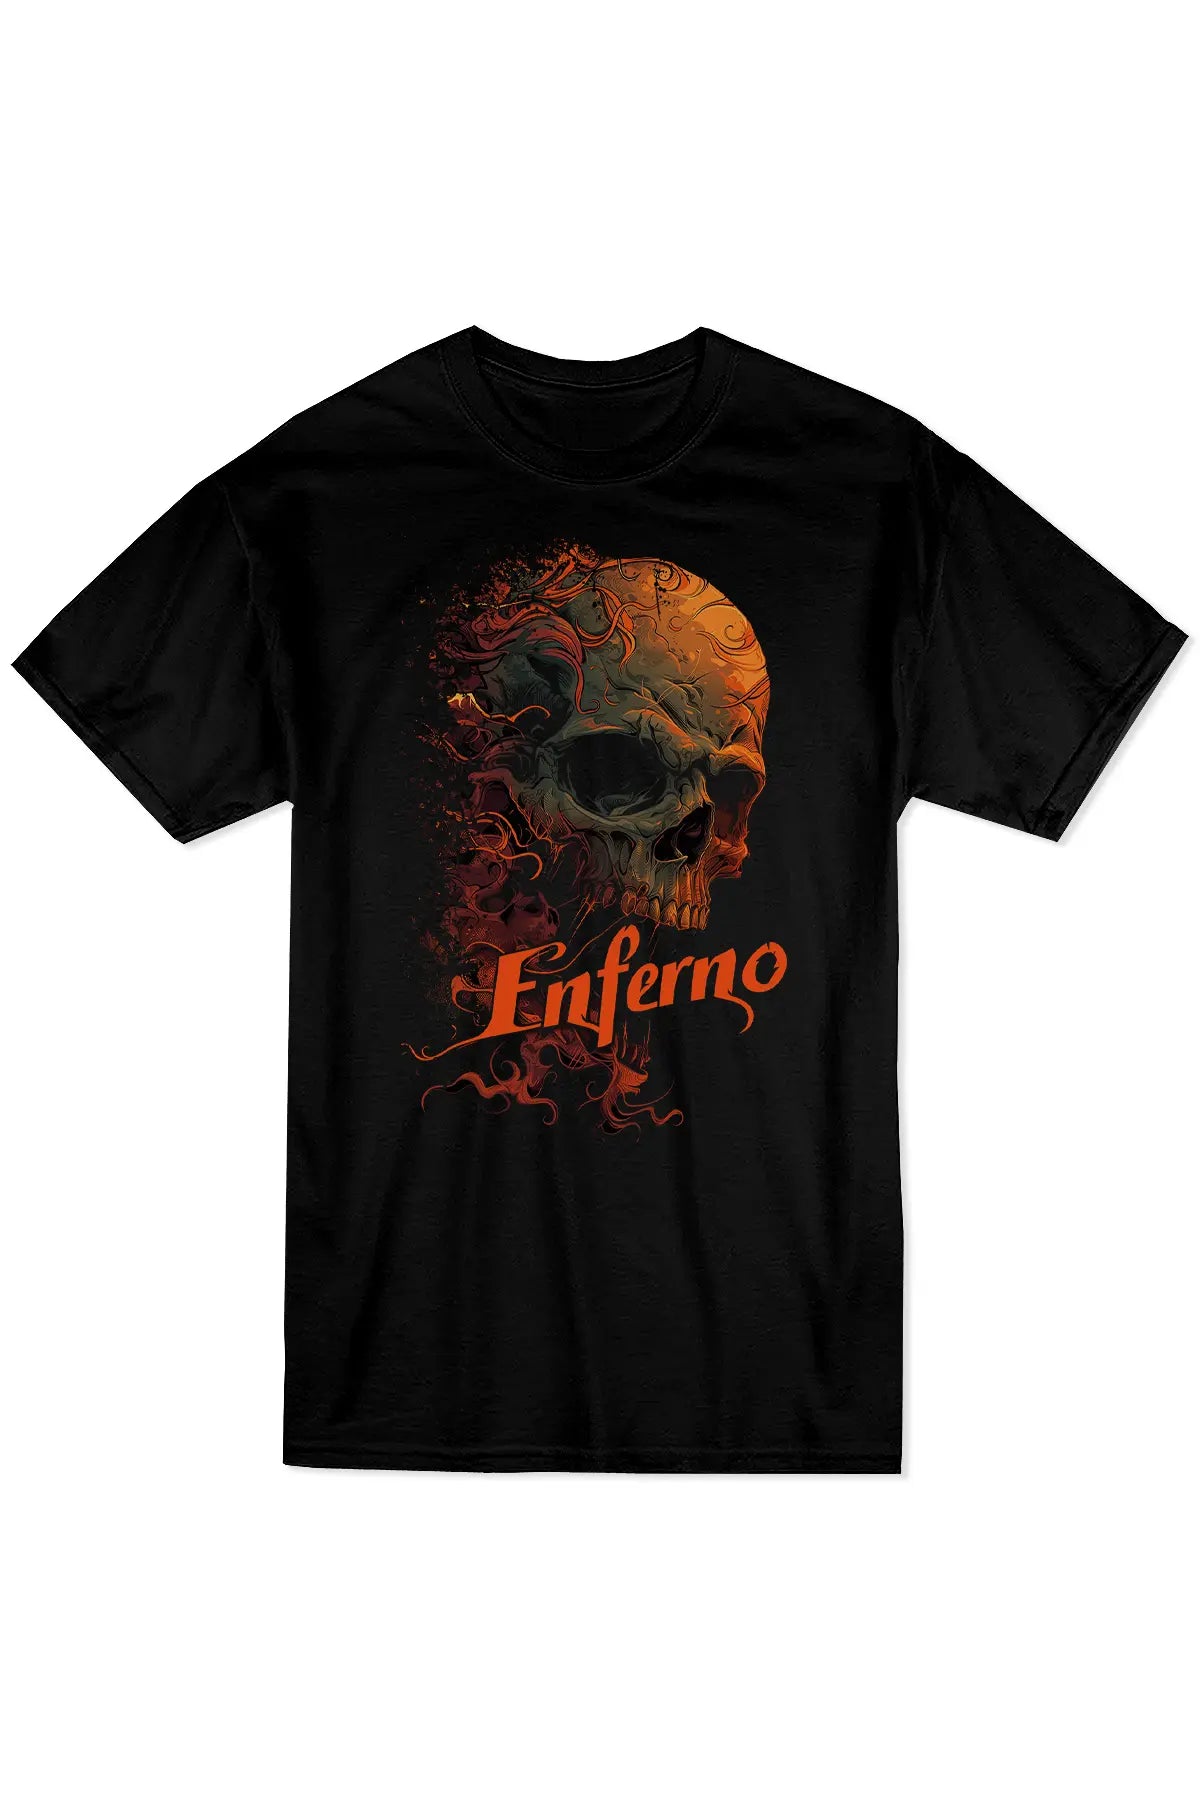 Enferno The Chaos Reborn Tee in Black.